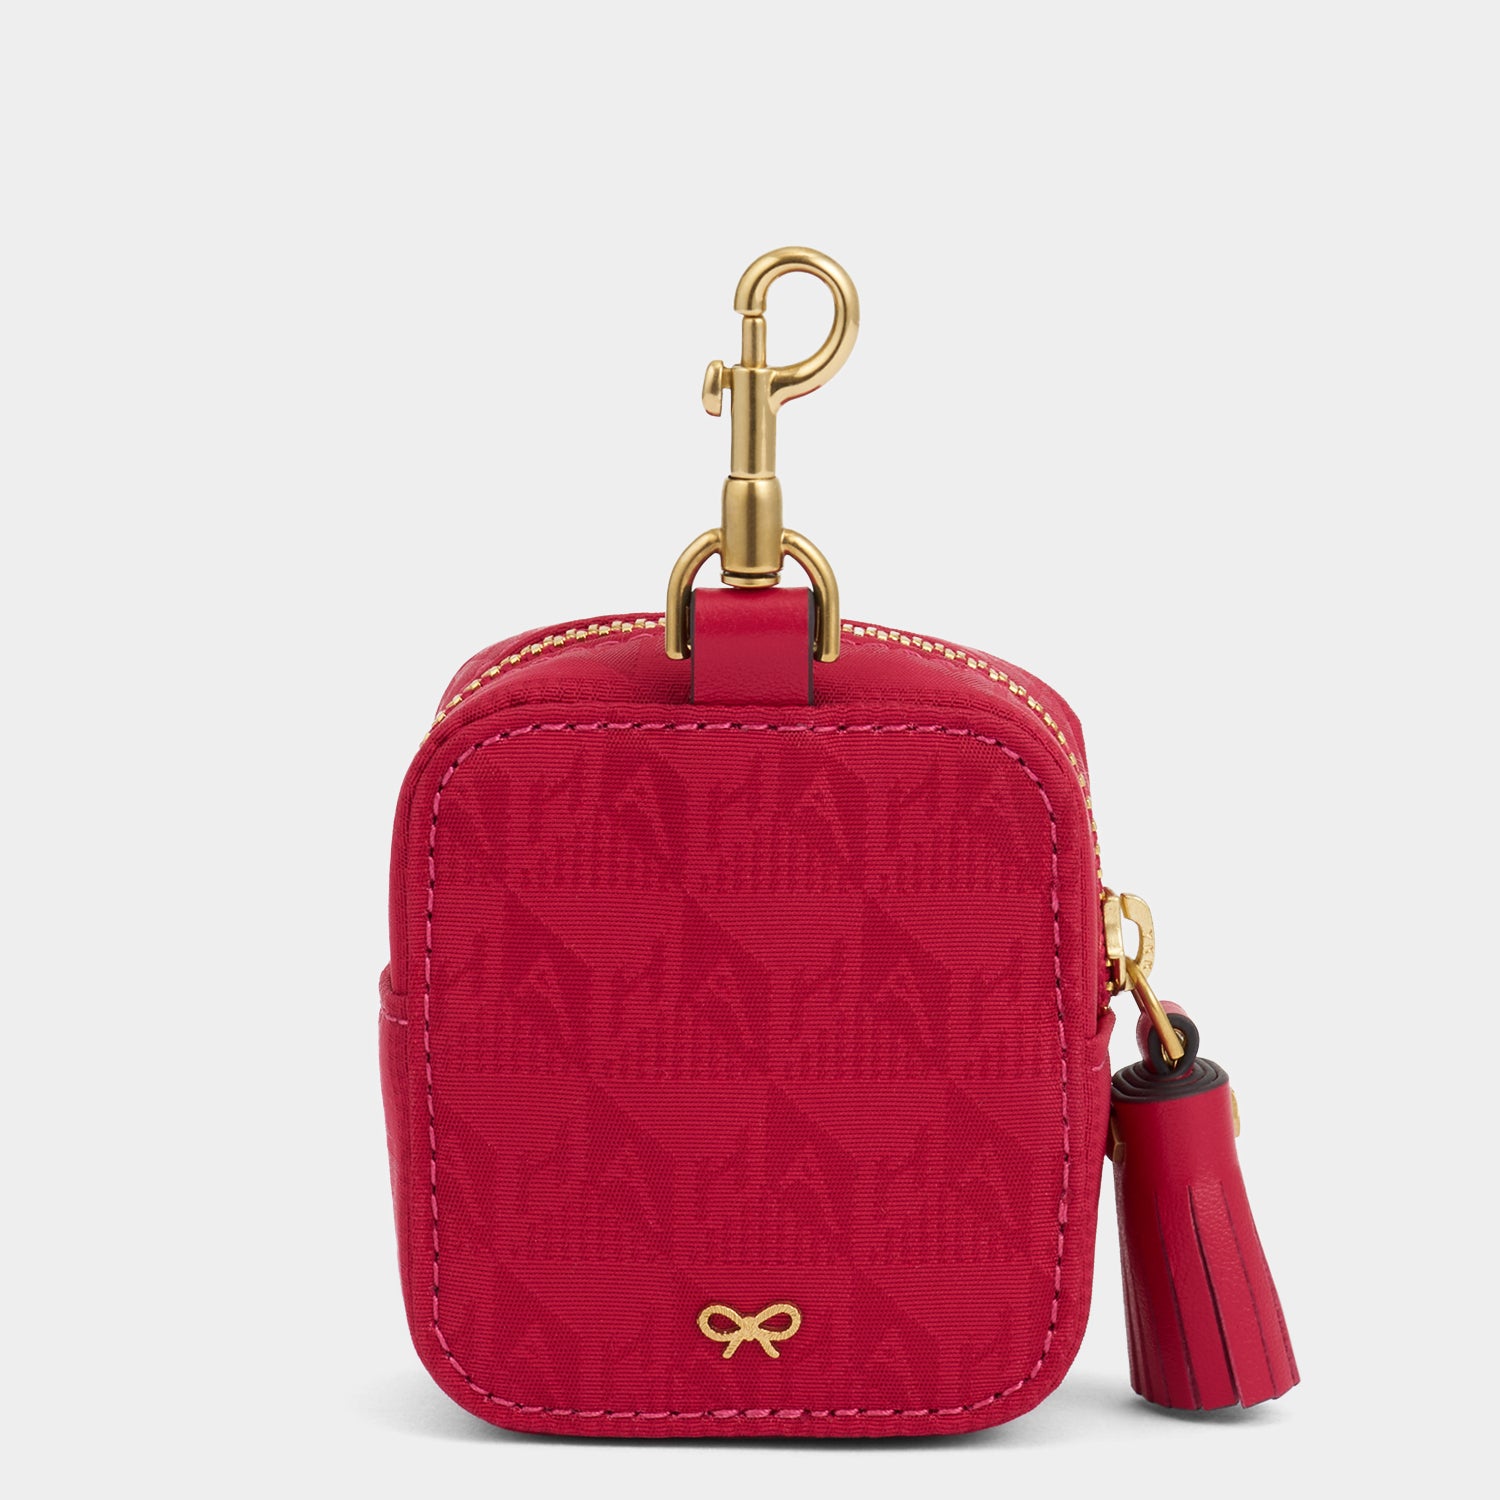 Logo Ear Phones Travel Pouch -

                  
                    Jacquard Nylon Pouch in Magenta -
                  

                  Anya Hindmarch UK
